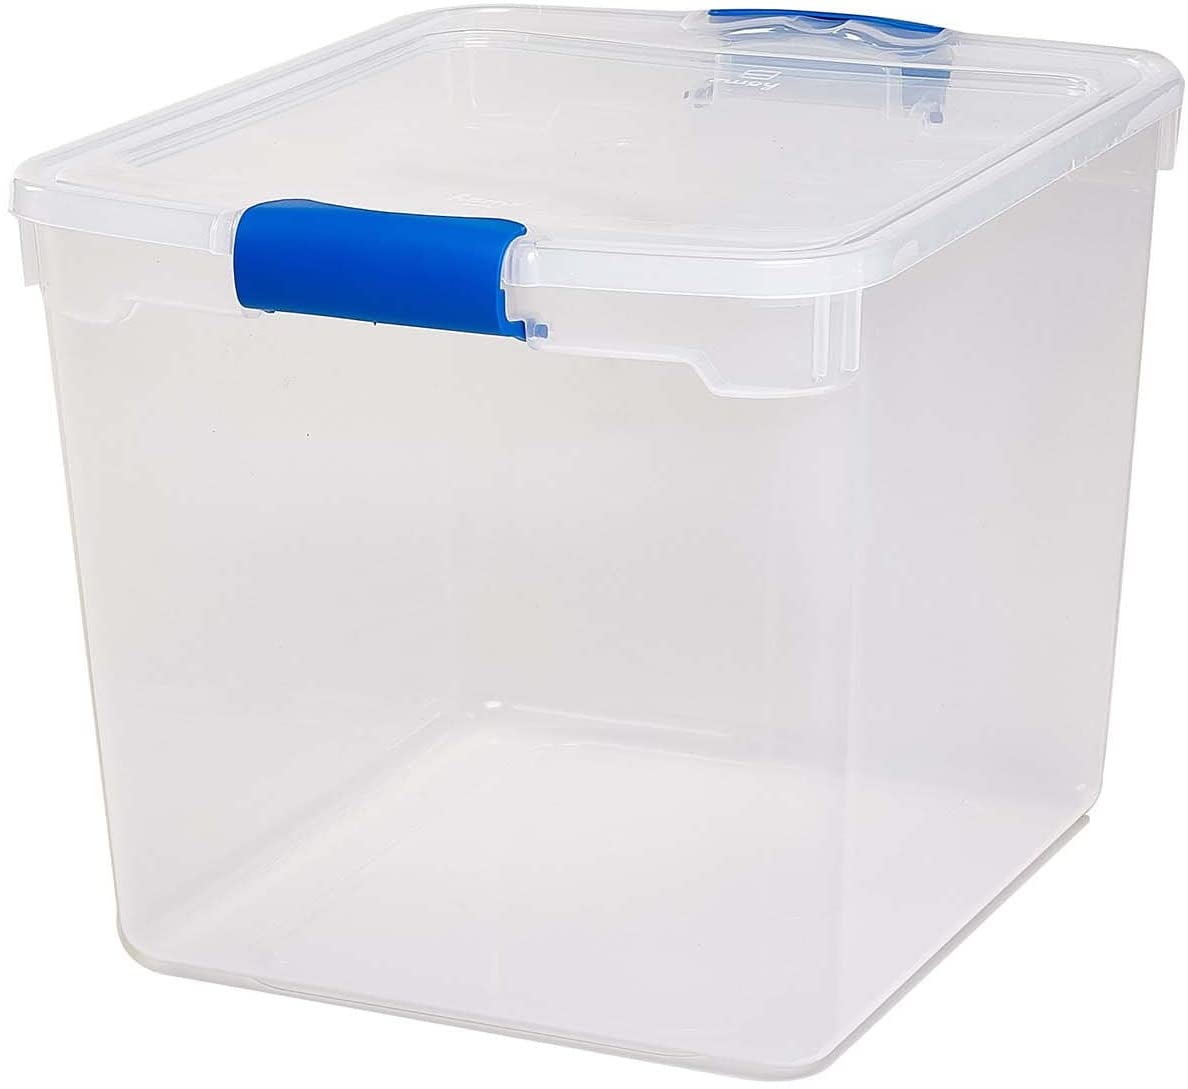 Details about   2-Pack Jumbo Modular Plastic Storage Stackable Storage Bin Boxes w/ Latch Handle 